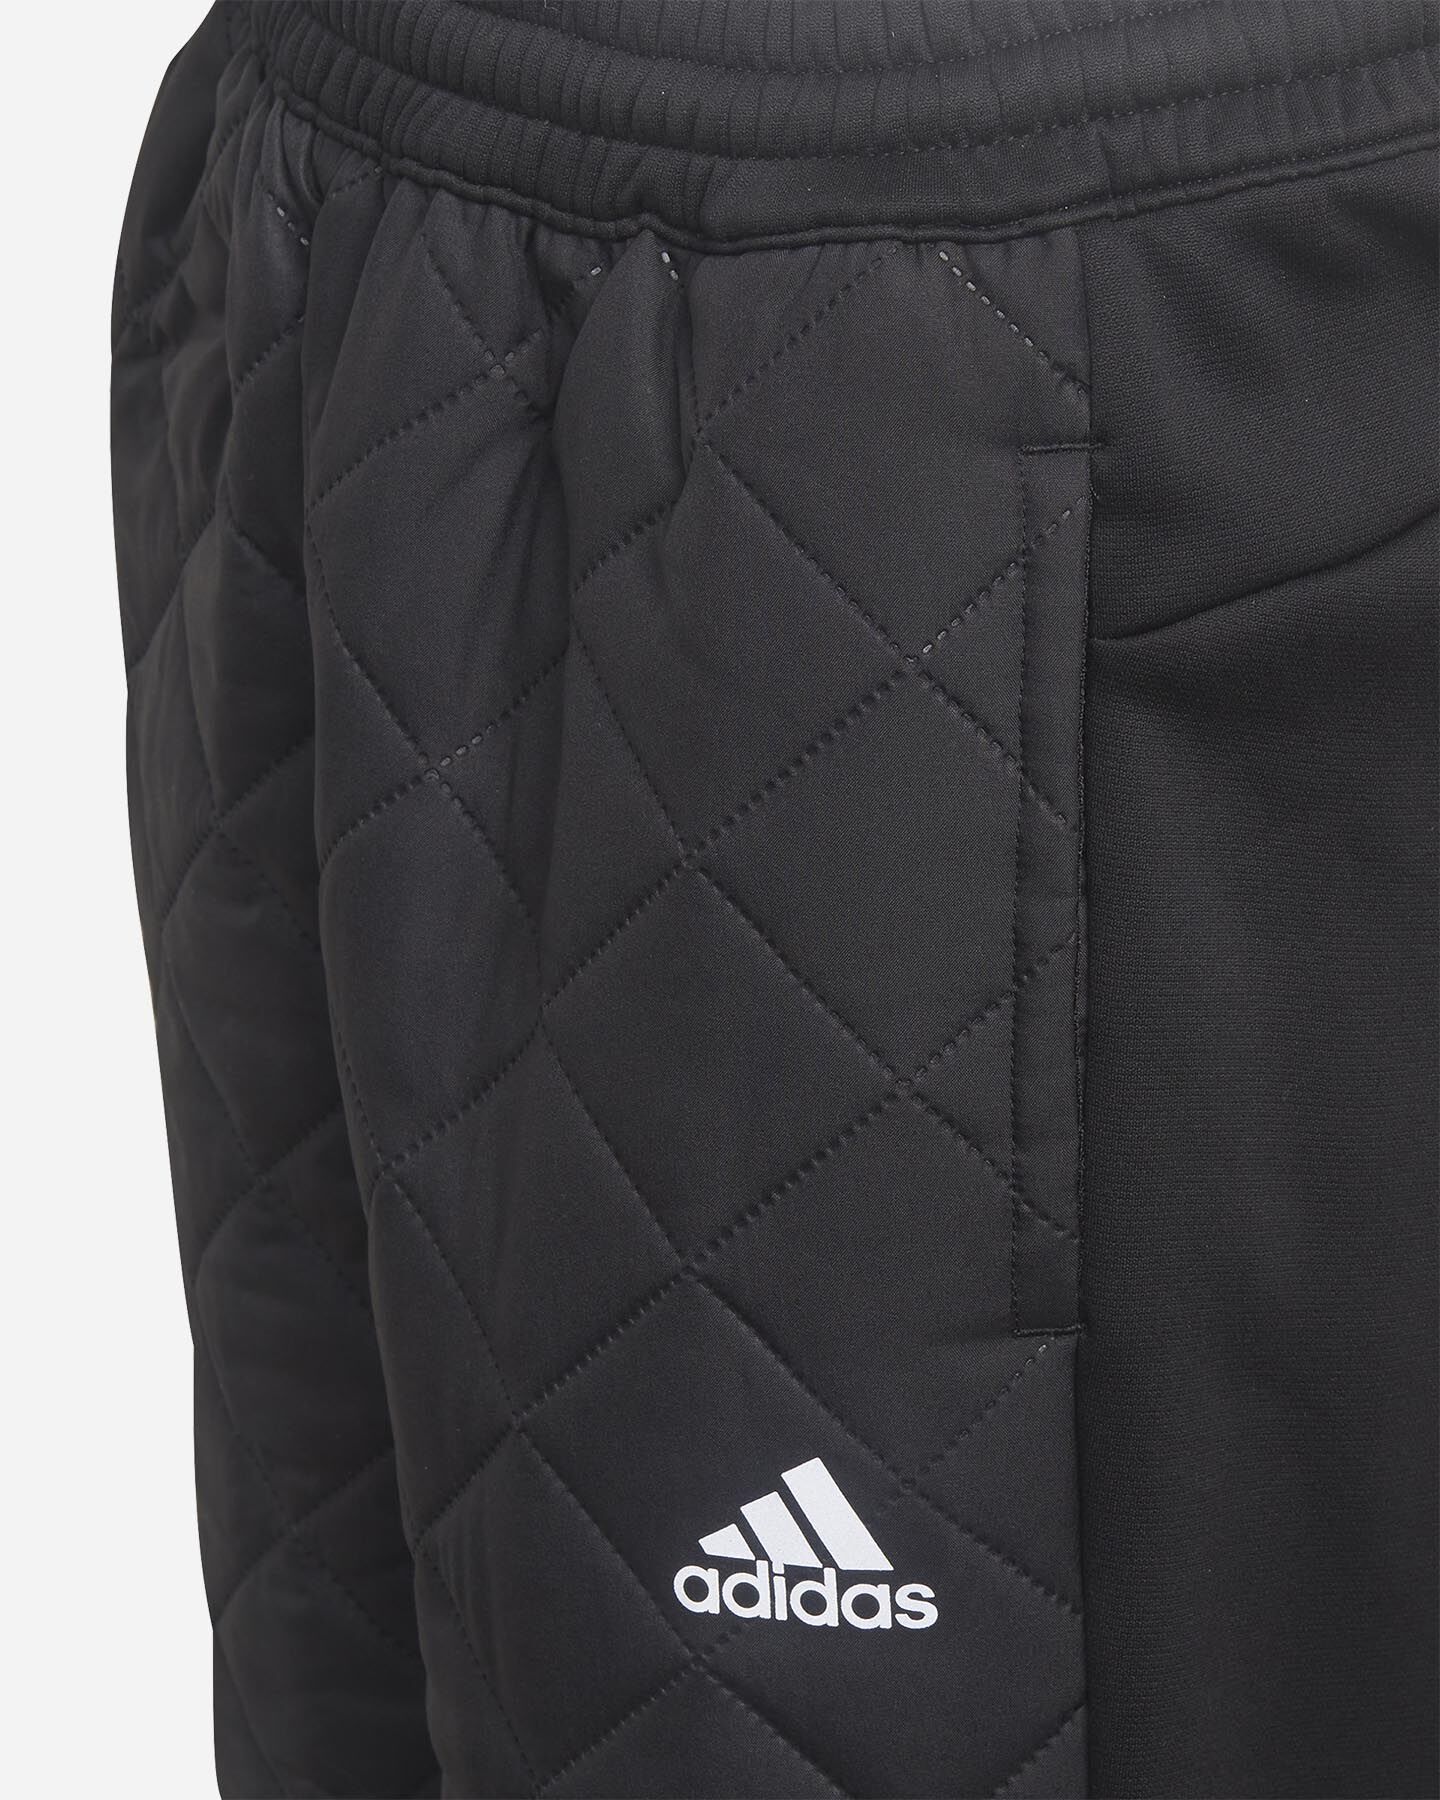  Pantalone ADIDAS FUTURE QUILTED JR S5466771|UNI|910A scatto 2